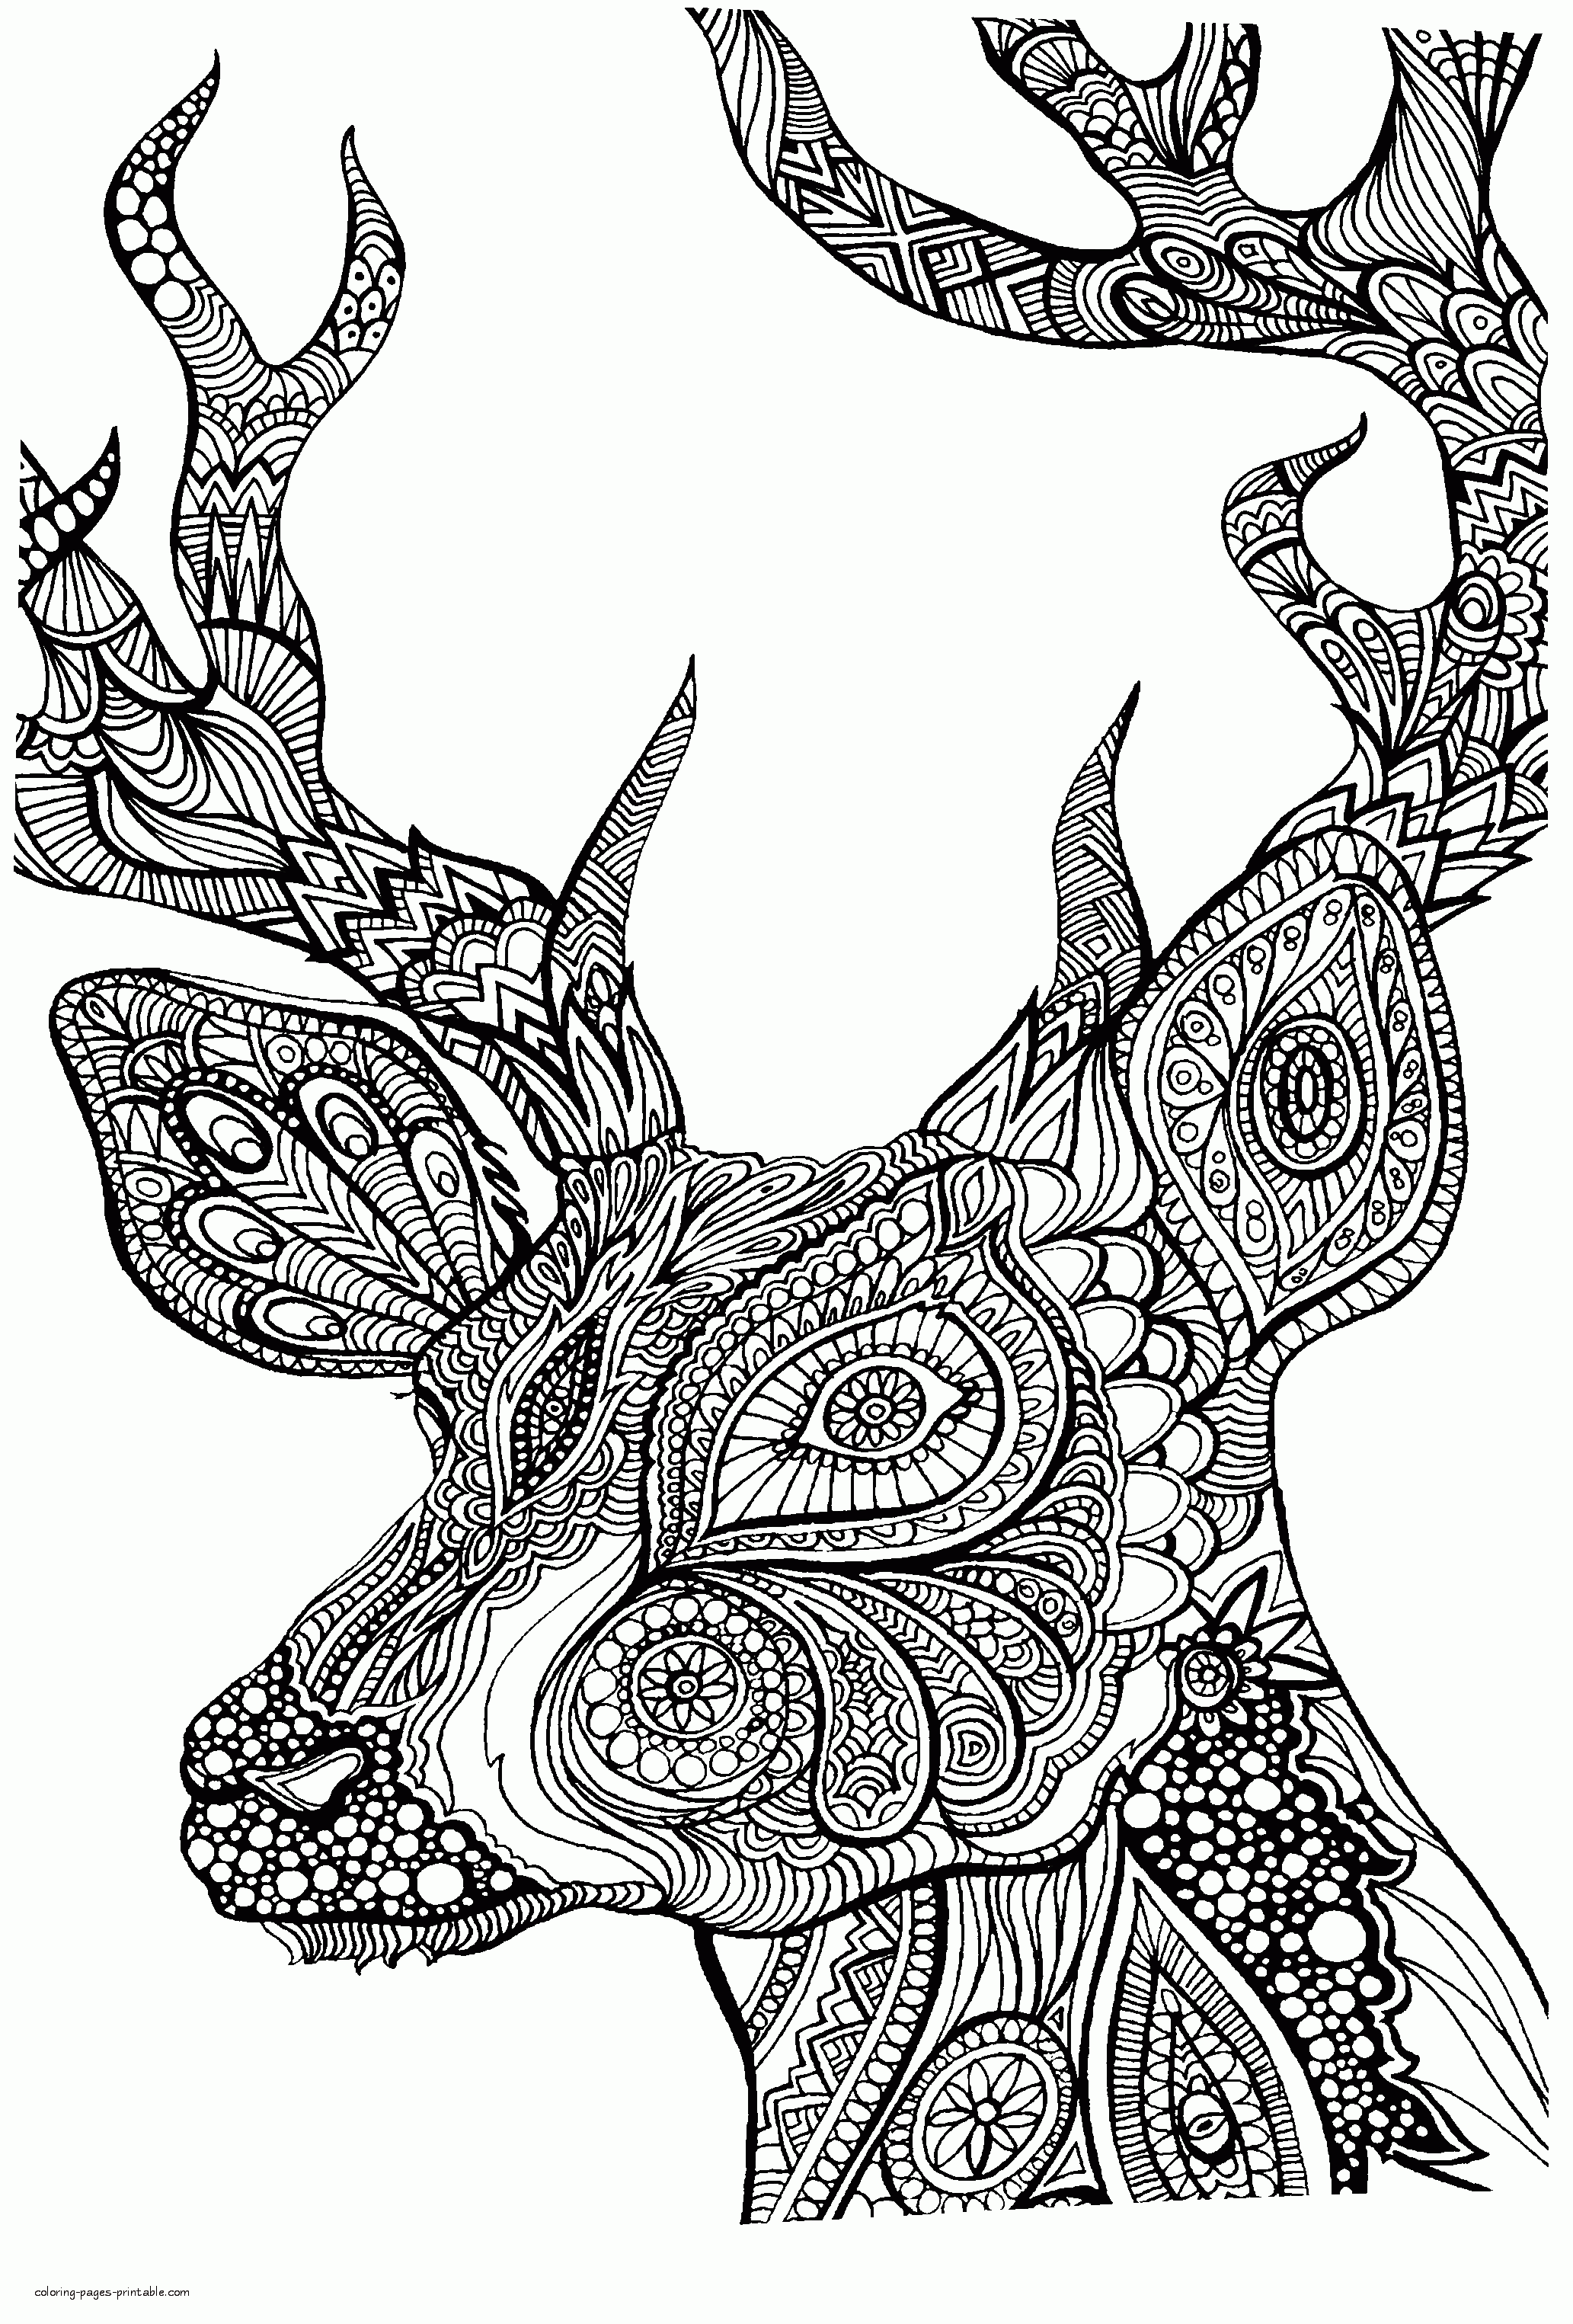 Free Animal Adult Coloring Pages With Deer COLORING PAGES PRINTABLE COM